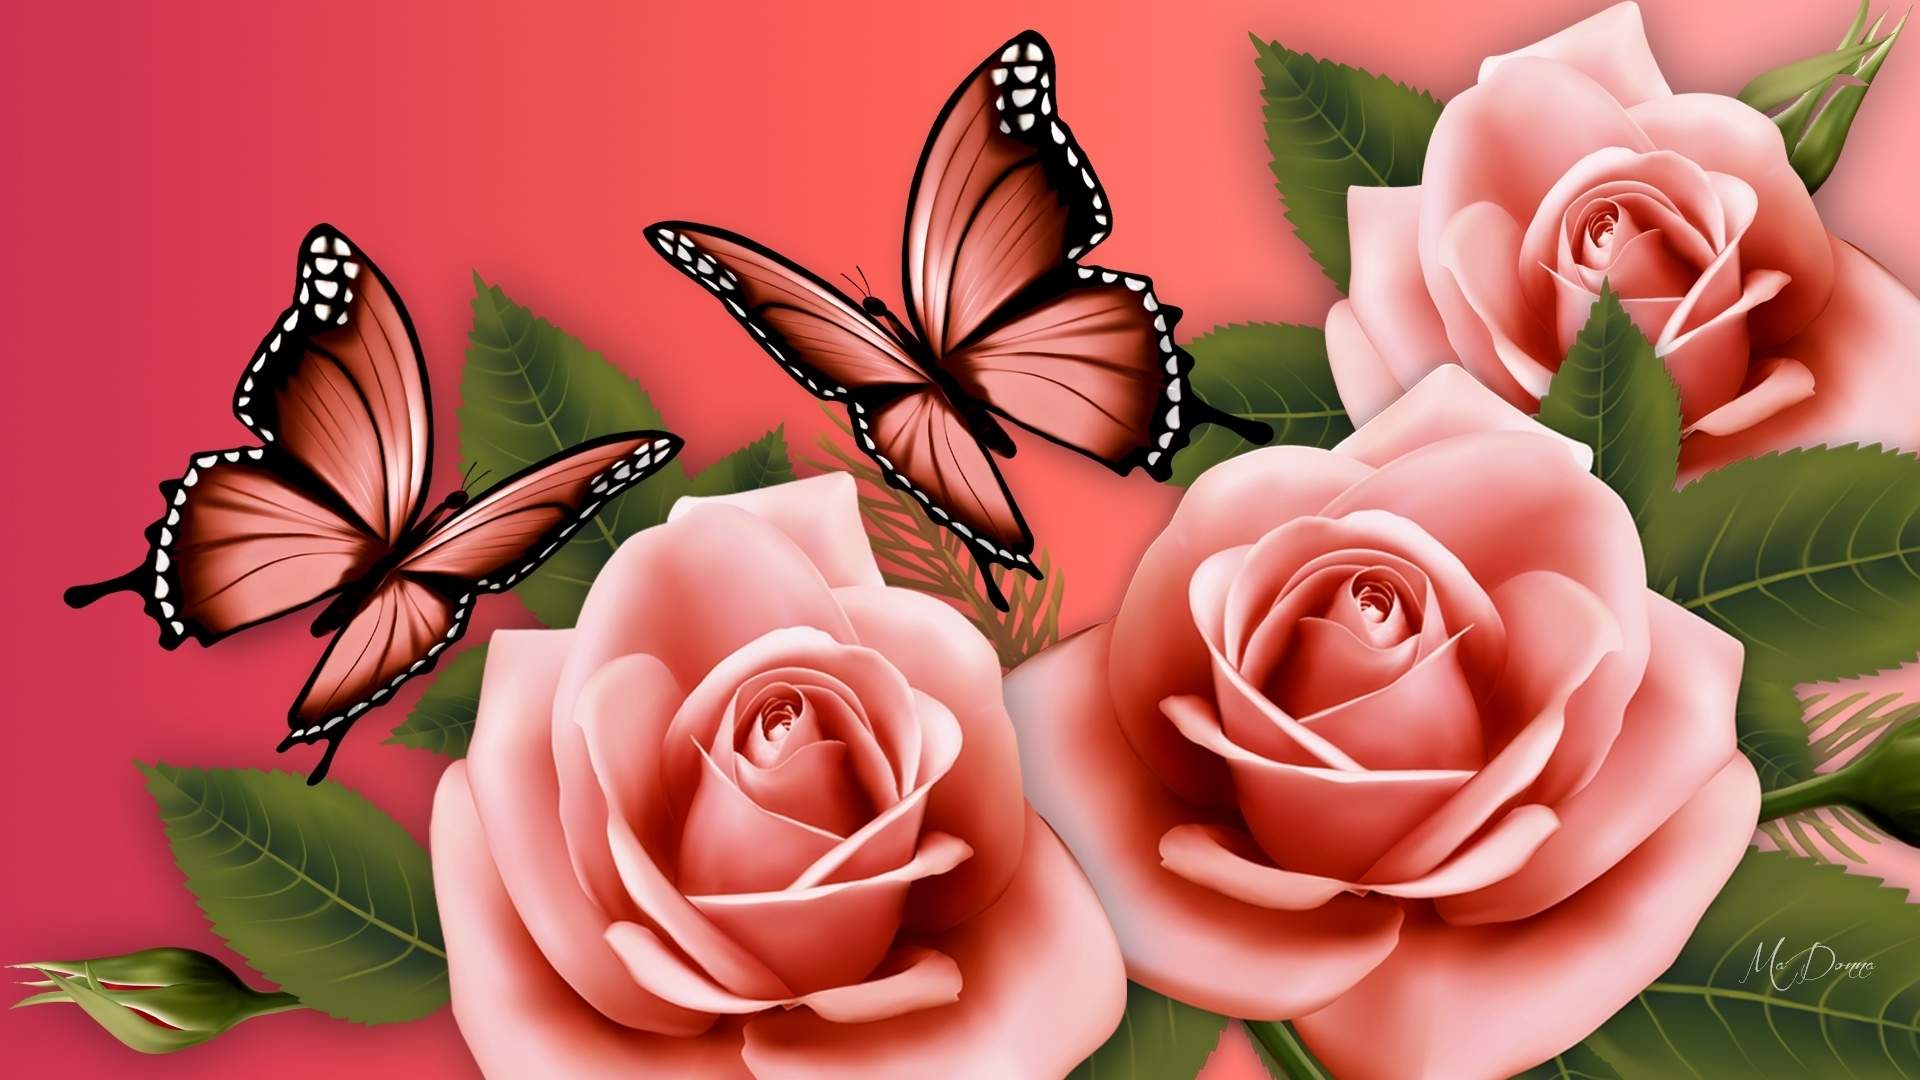 Flowers And Butterflies Wallpaper At